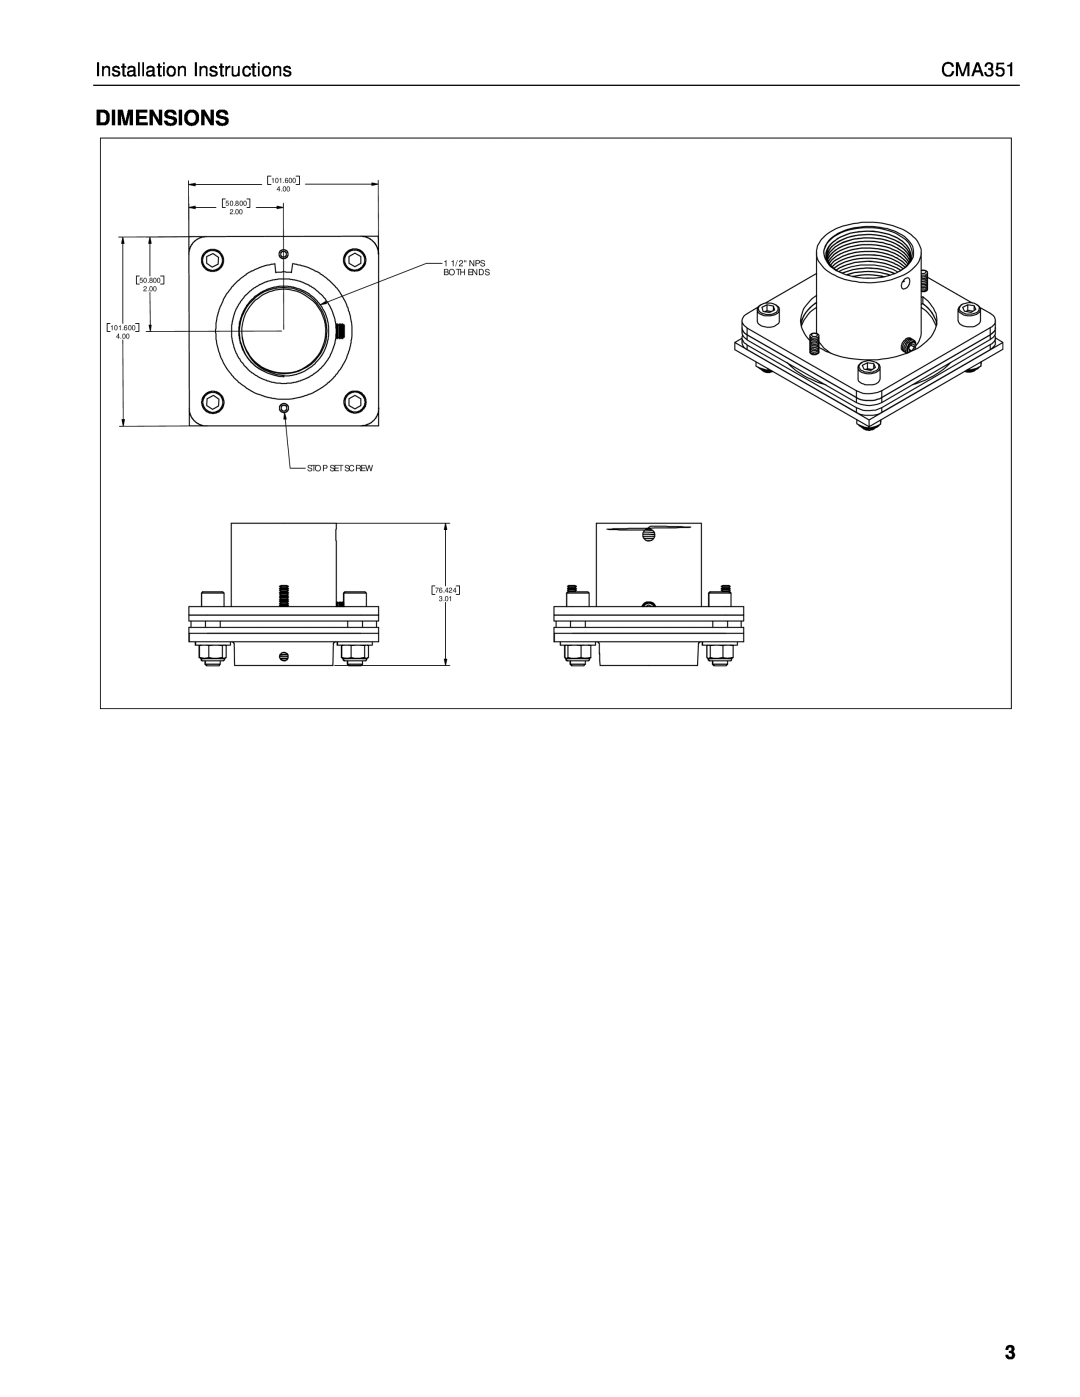 Chief Manufacturing CMA351 Dimensions, Installation Instructions, 1 1/2 NPS, Both Ends, Stop Set Screw 